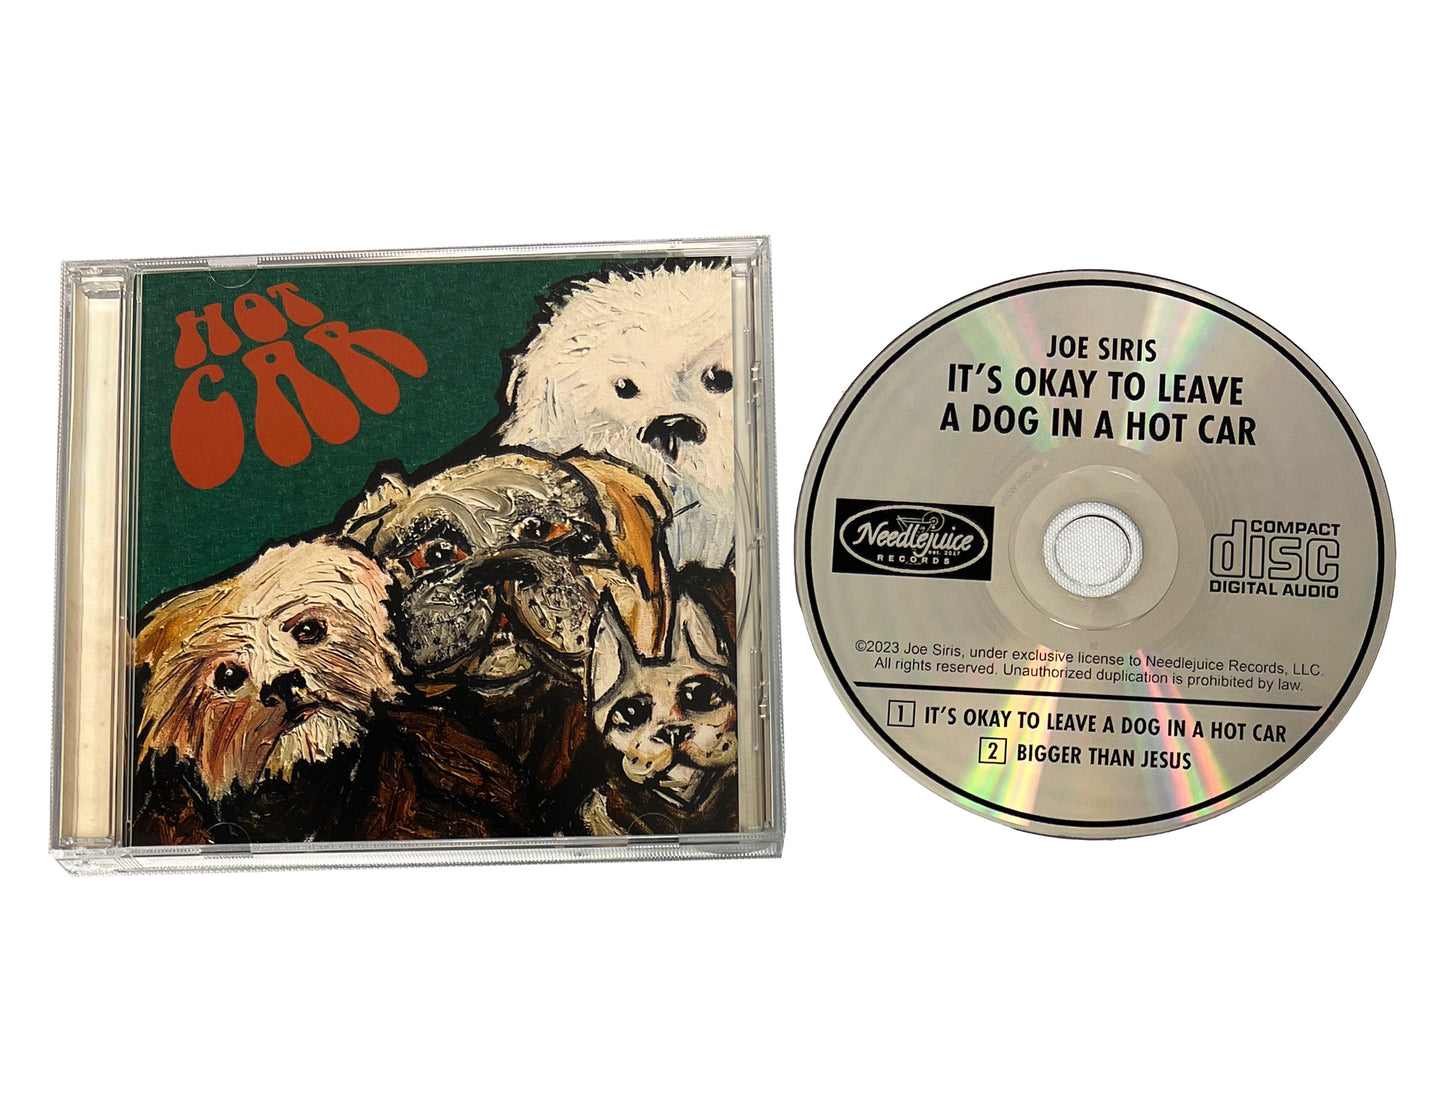 It's Okay to Leave a Dog in a Hot Car - CD Single